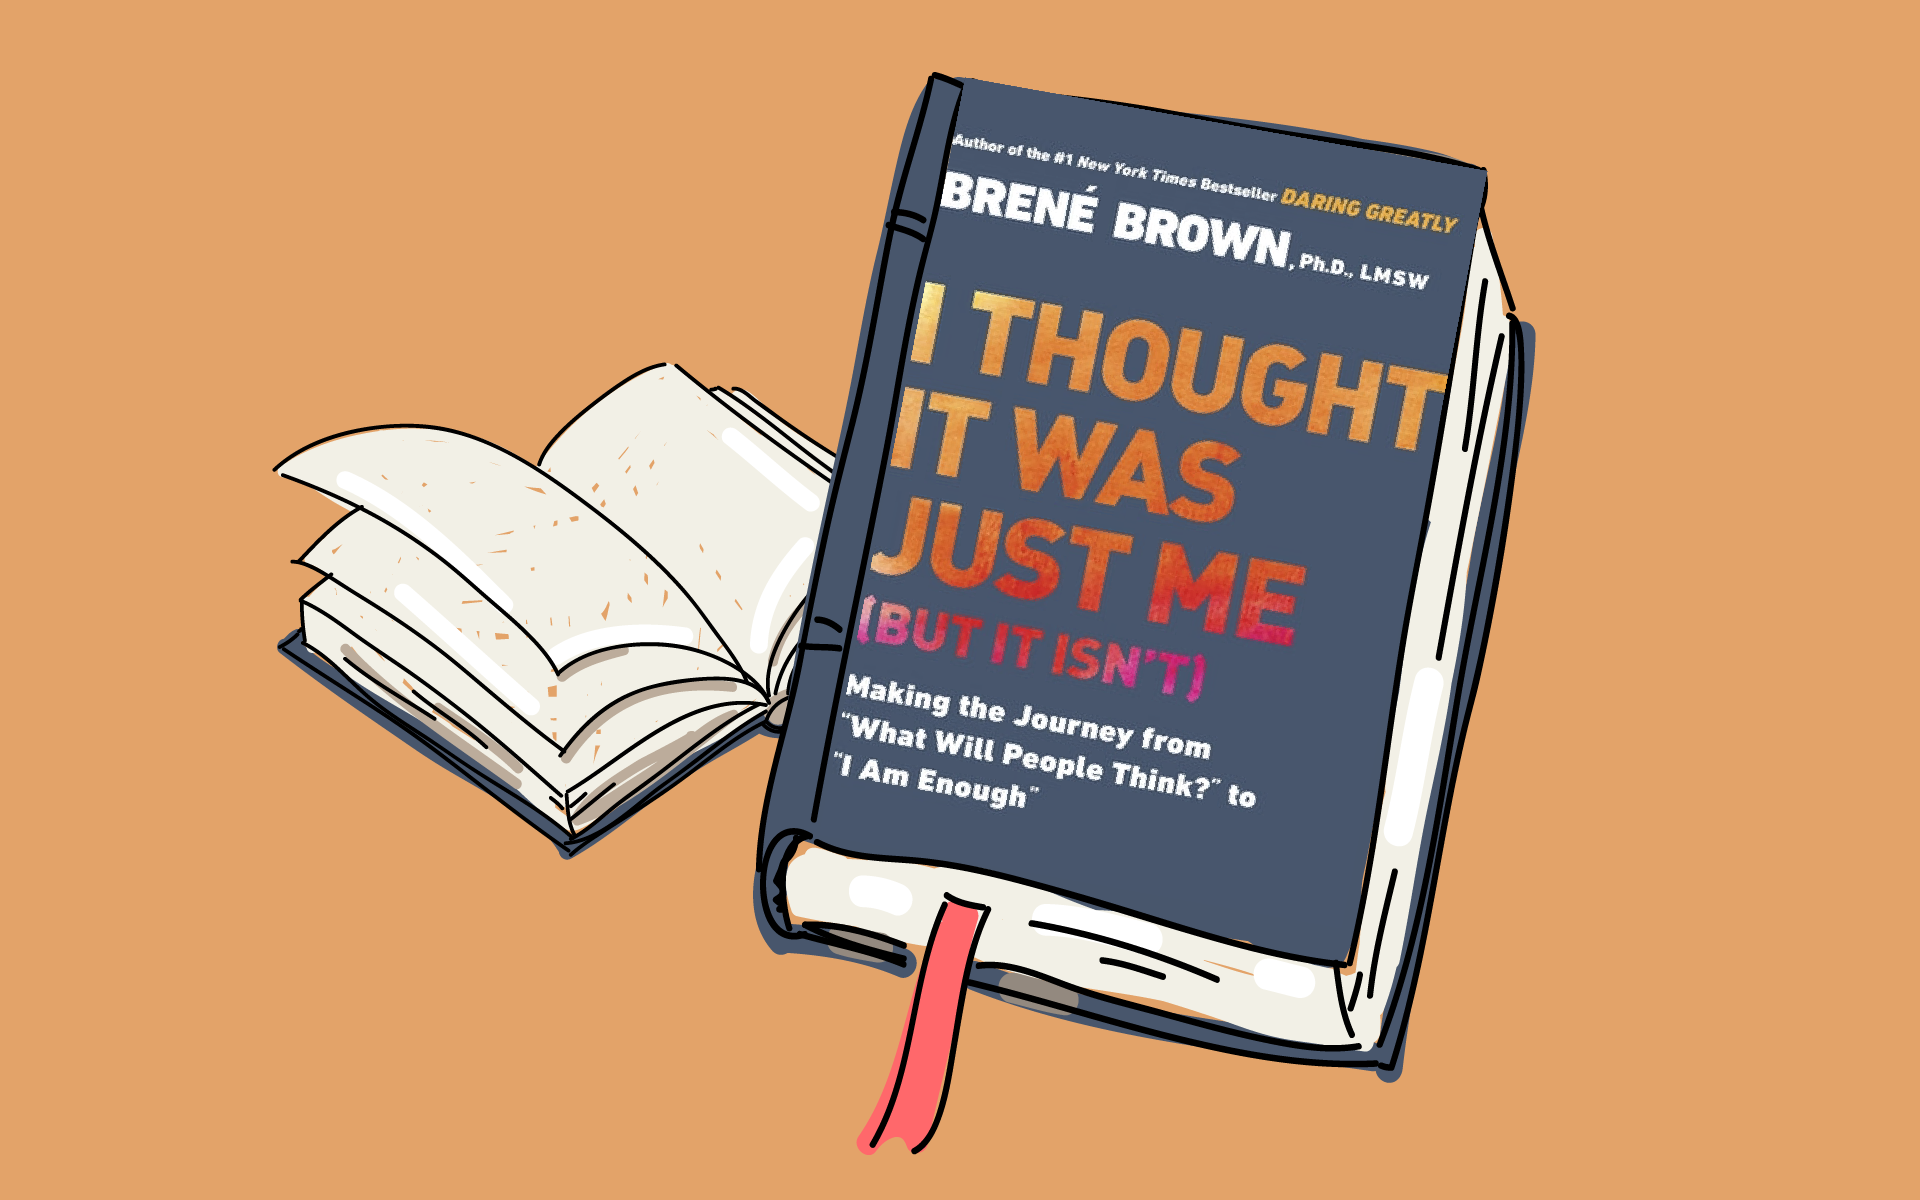 ”I thought it was just me (but it isn’t)", by Brené Brown